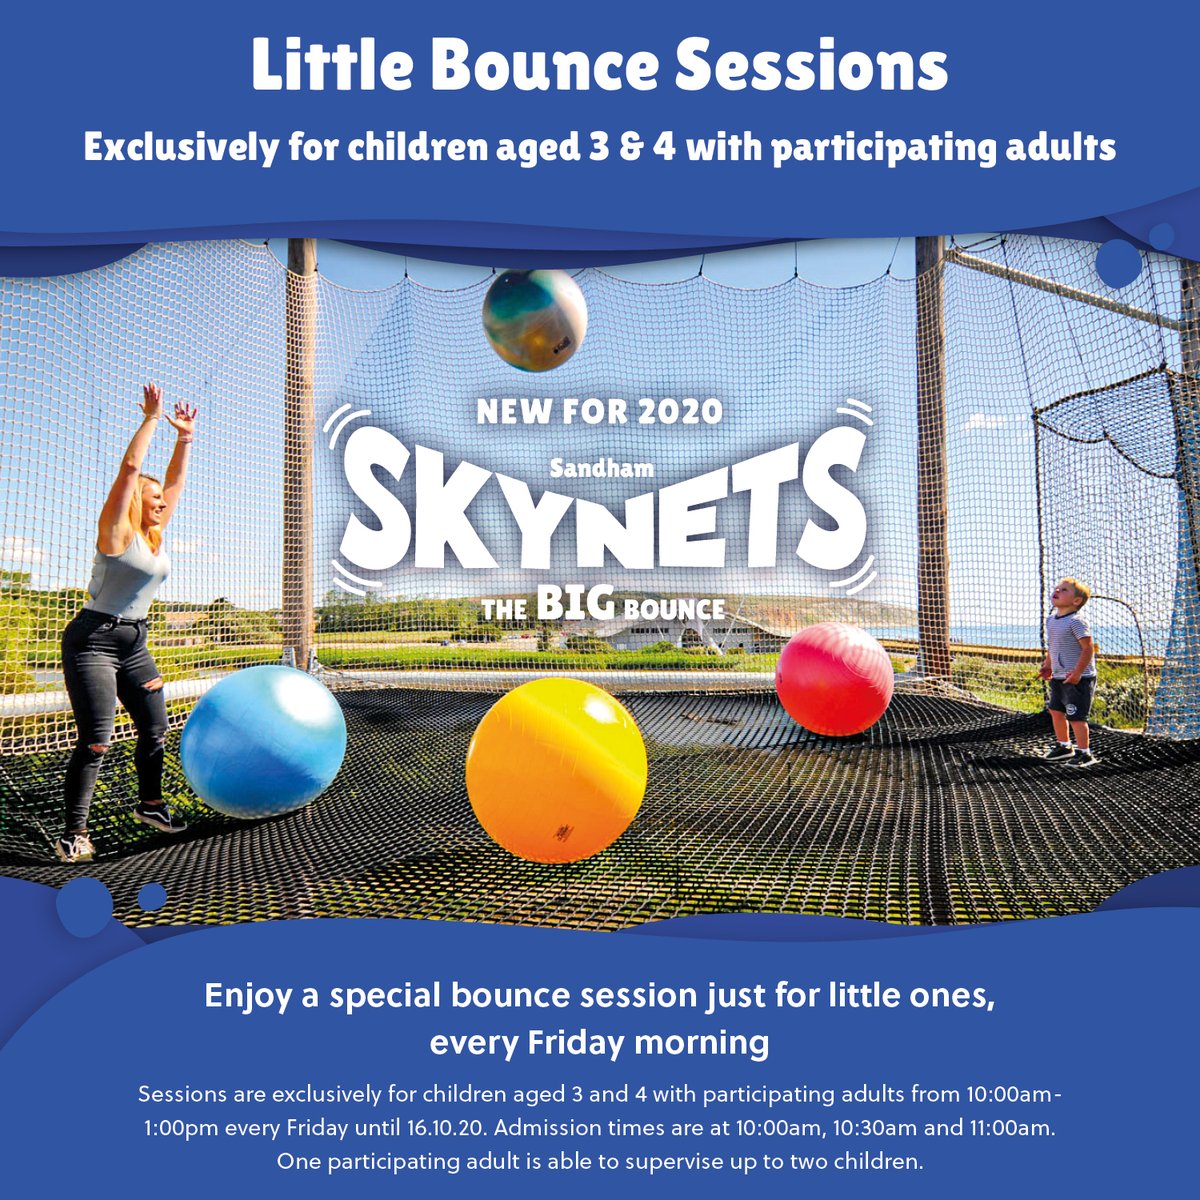 Join us for our 'little bounce' sessions every Friday morning! Normal sessions for all age groups then start at 14:00 on a Friday, and then every half an hour with our last admission at 16:00. #IOW #IsleOfWight @VisitIOW